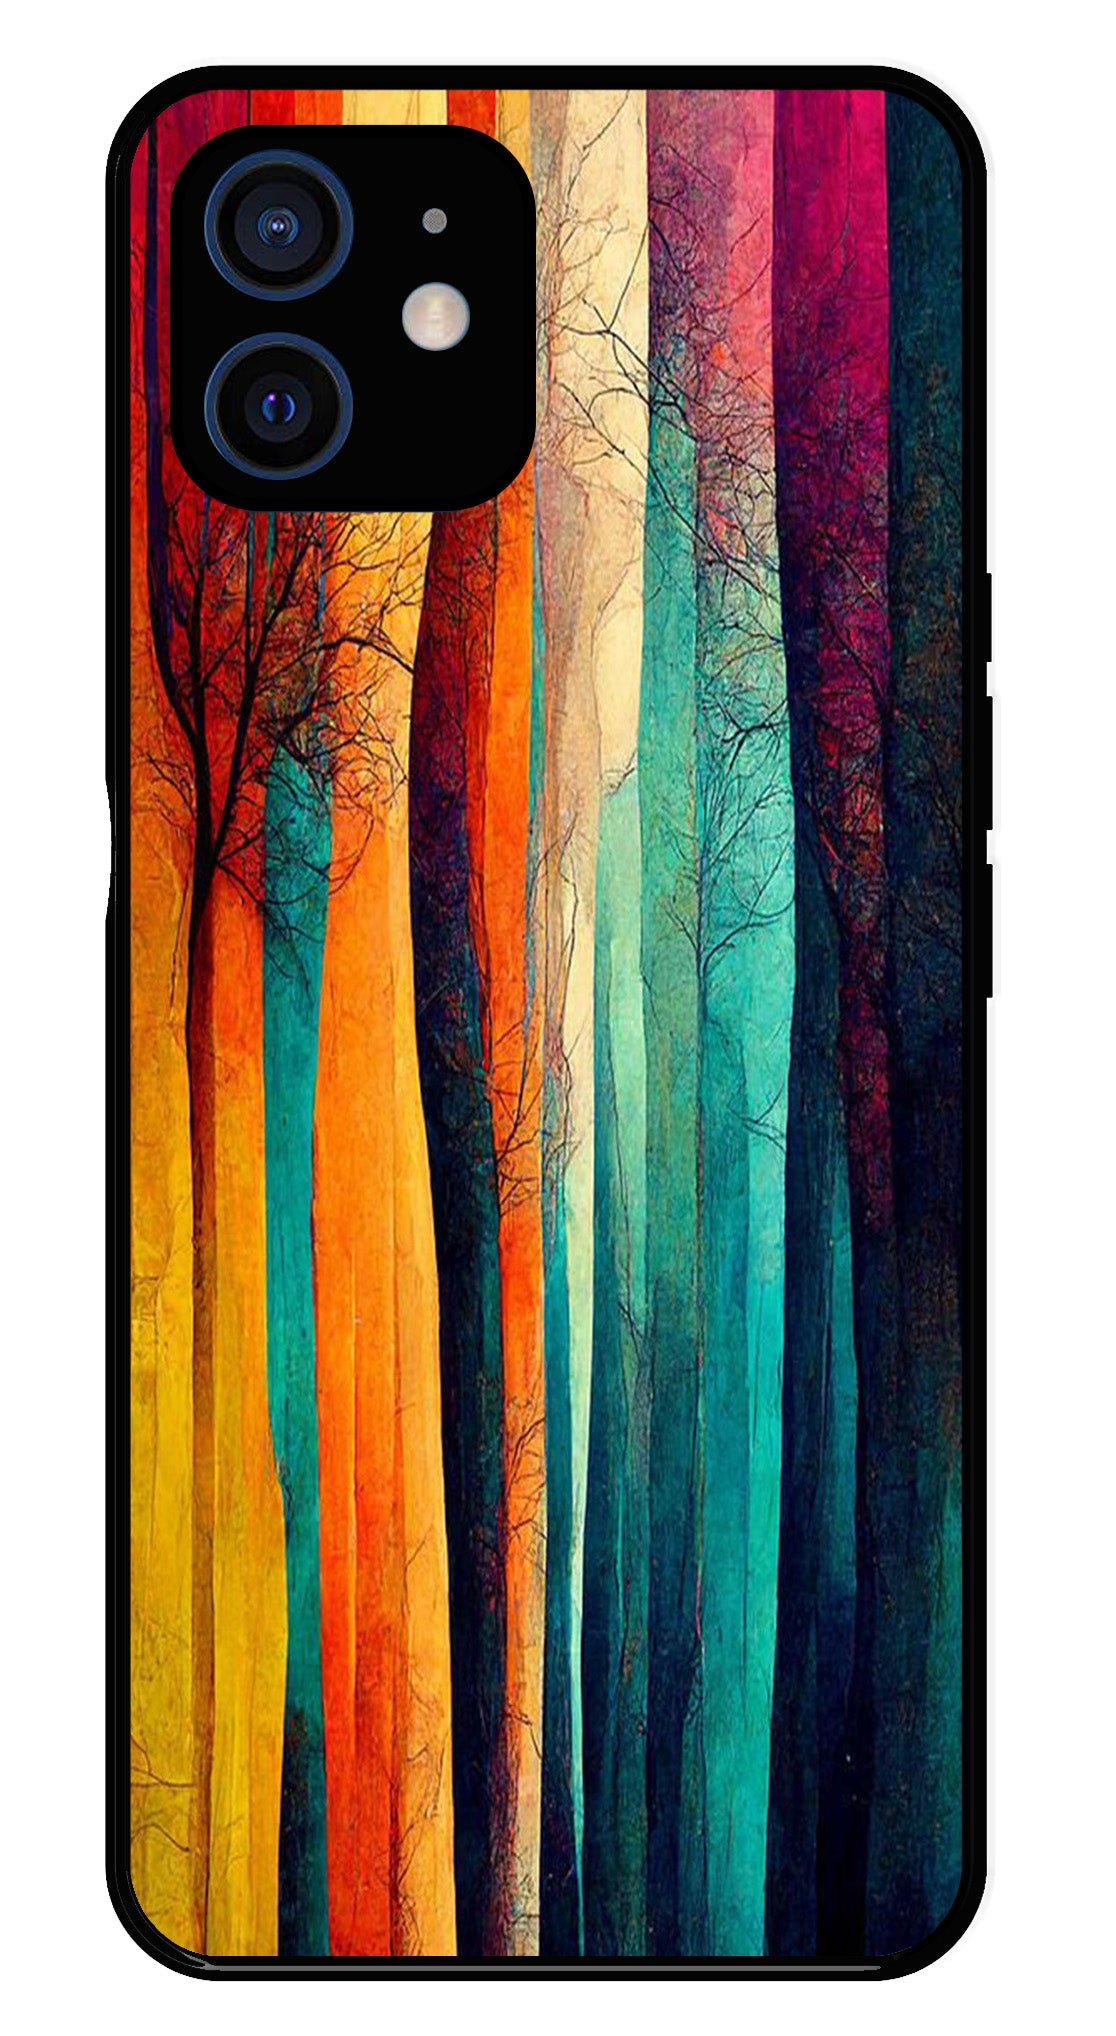 Modern Art Colorful Metal Mobile Case for iPhone 11